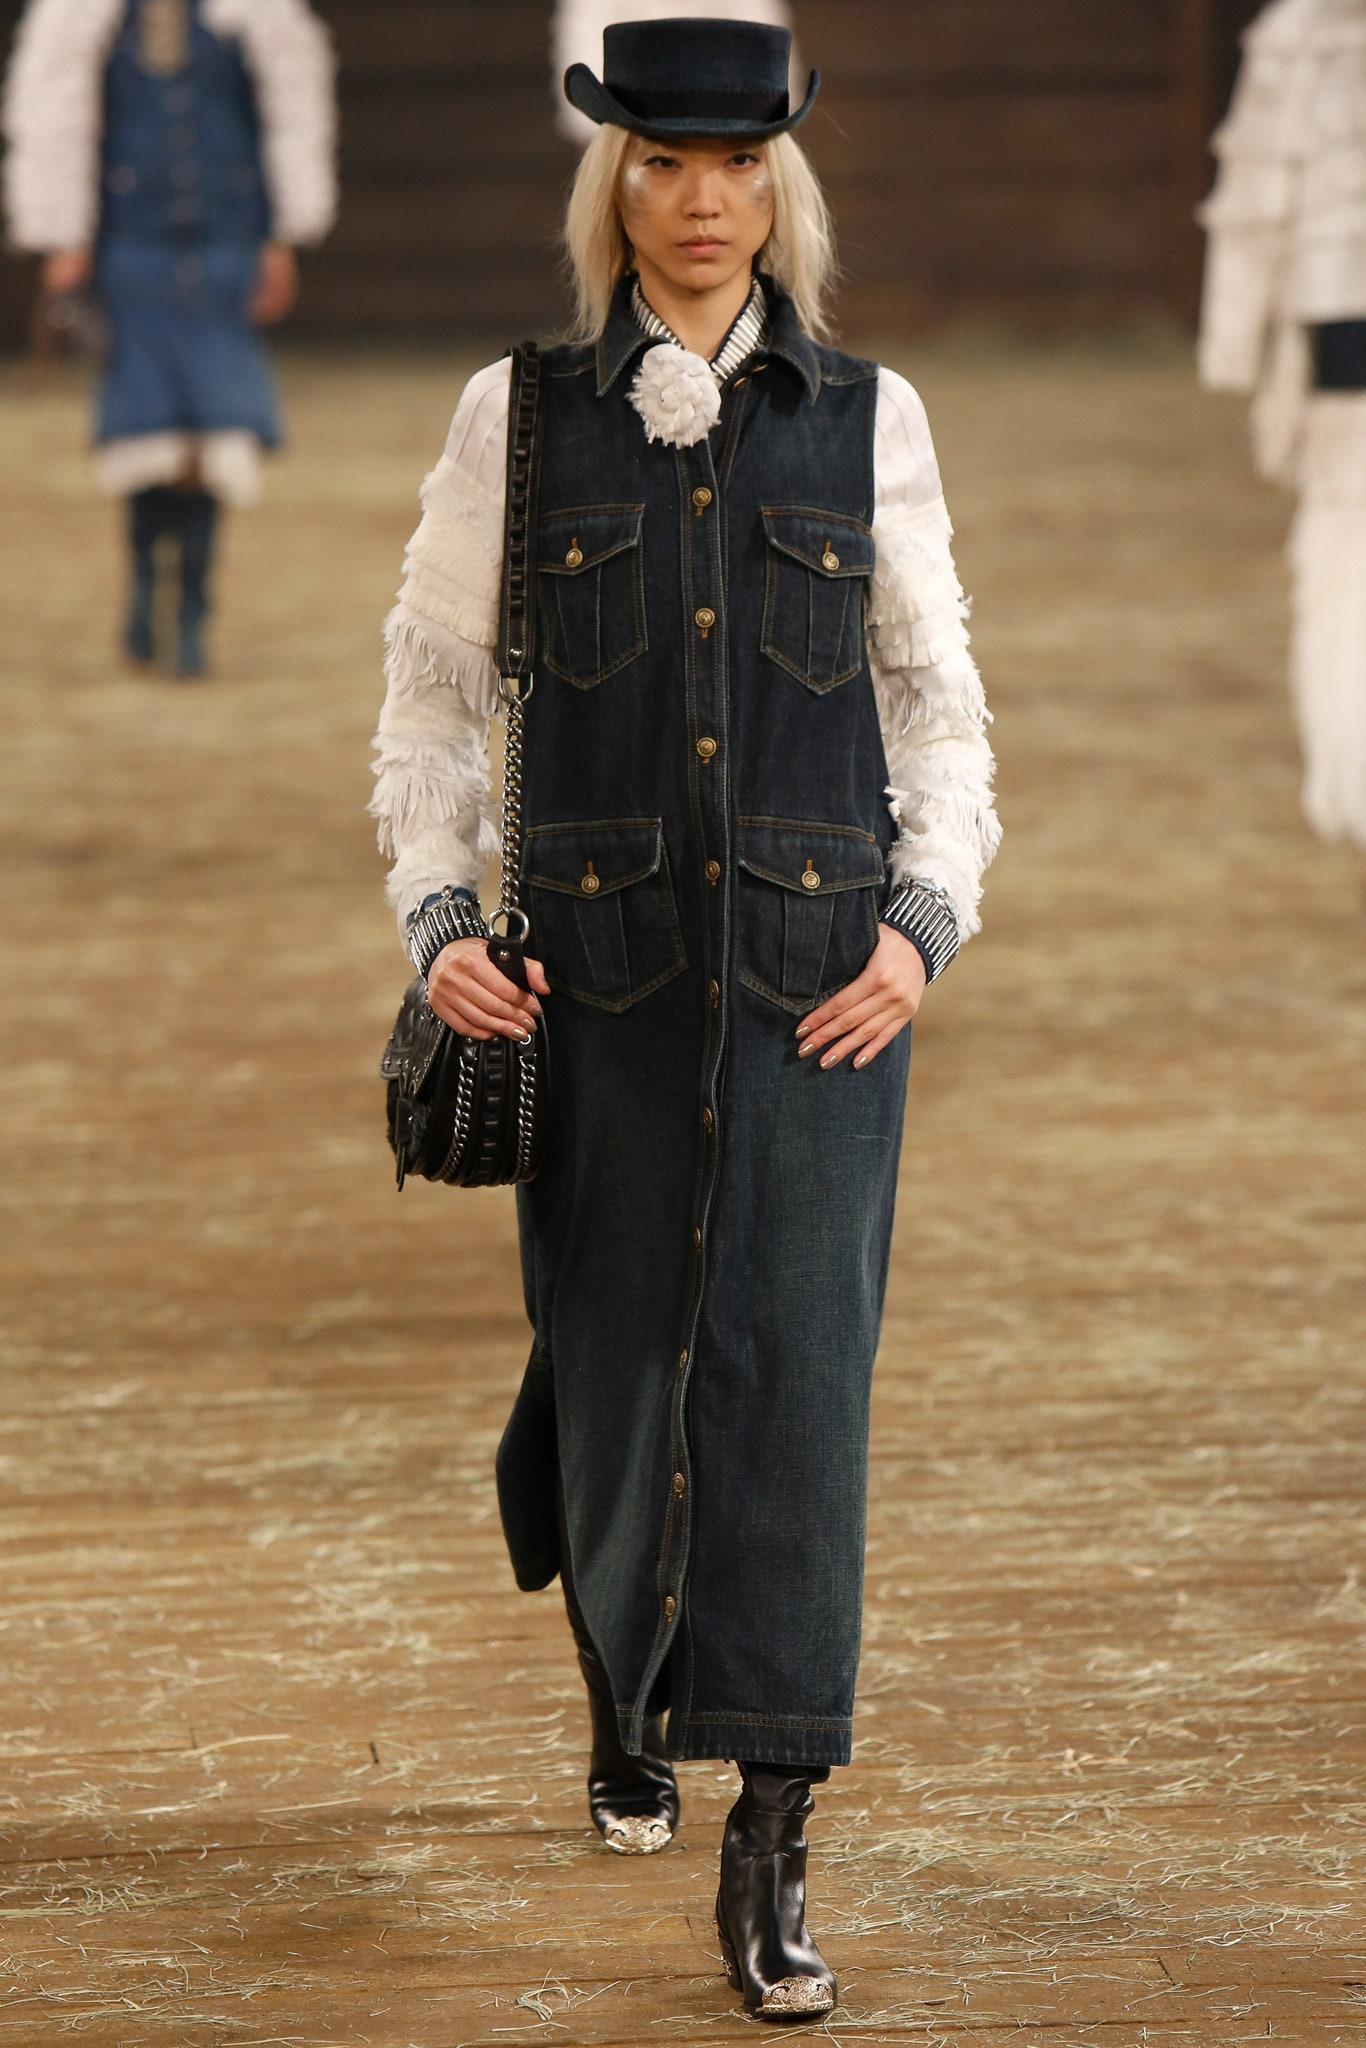 New Chanel maxi denim vest from Catwalk of Paris / DALLAS 2014 Metiers d'Art Collection by Karl Lagerfeld.
- gorgeous CC logo jewel 'star' buttons
Size mark 46 FR. Tag attached.